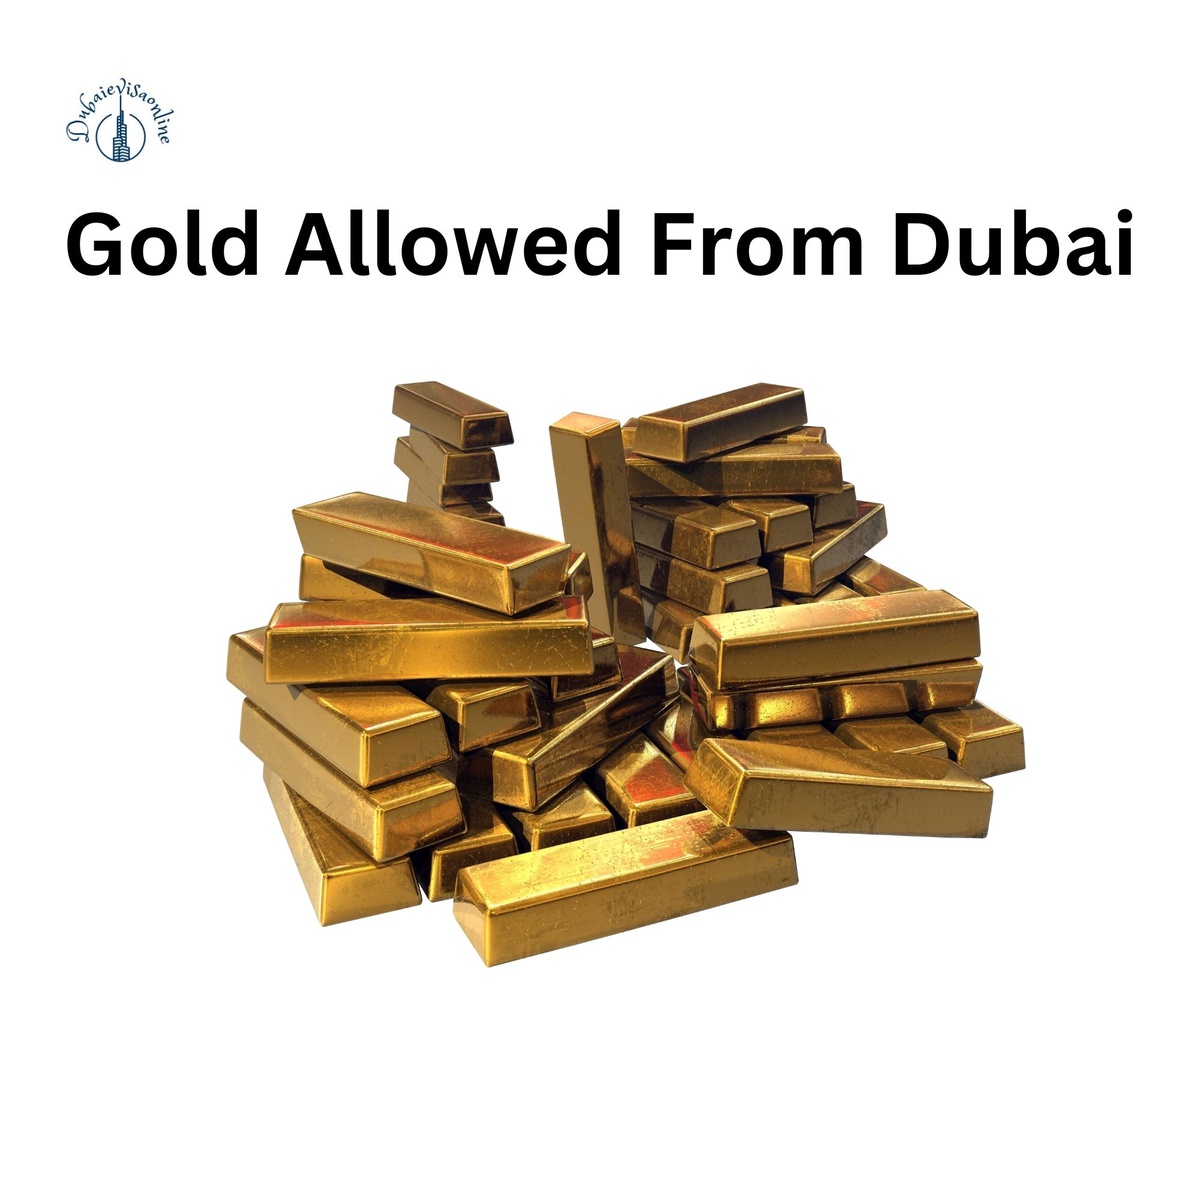 How Much Gold is allowed from Dubai to India on Tourist Visa